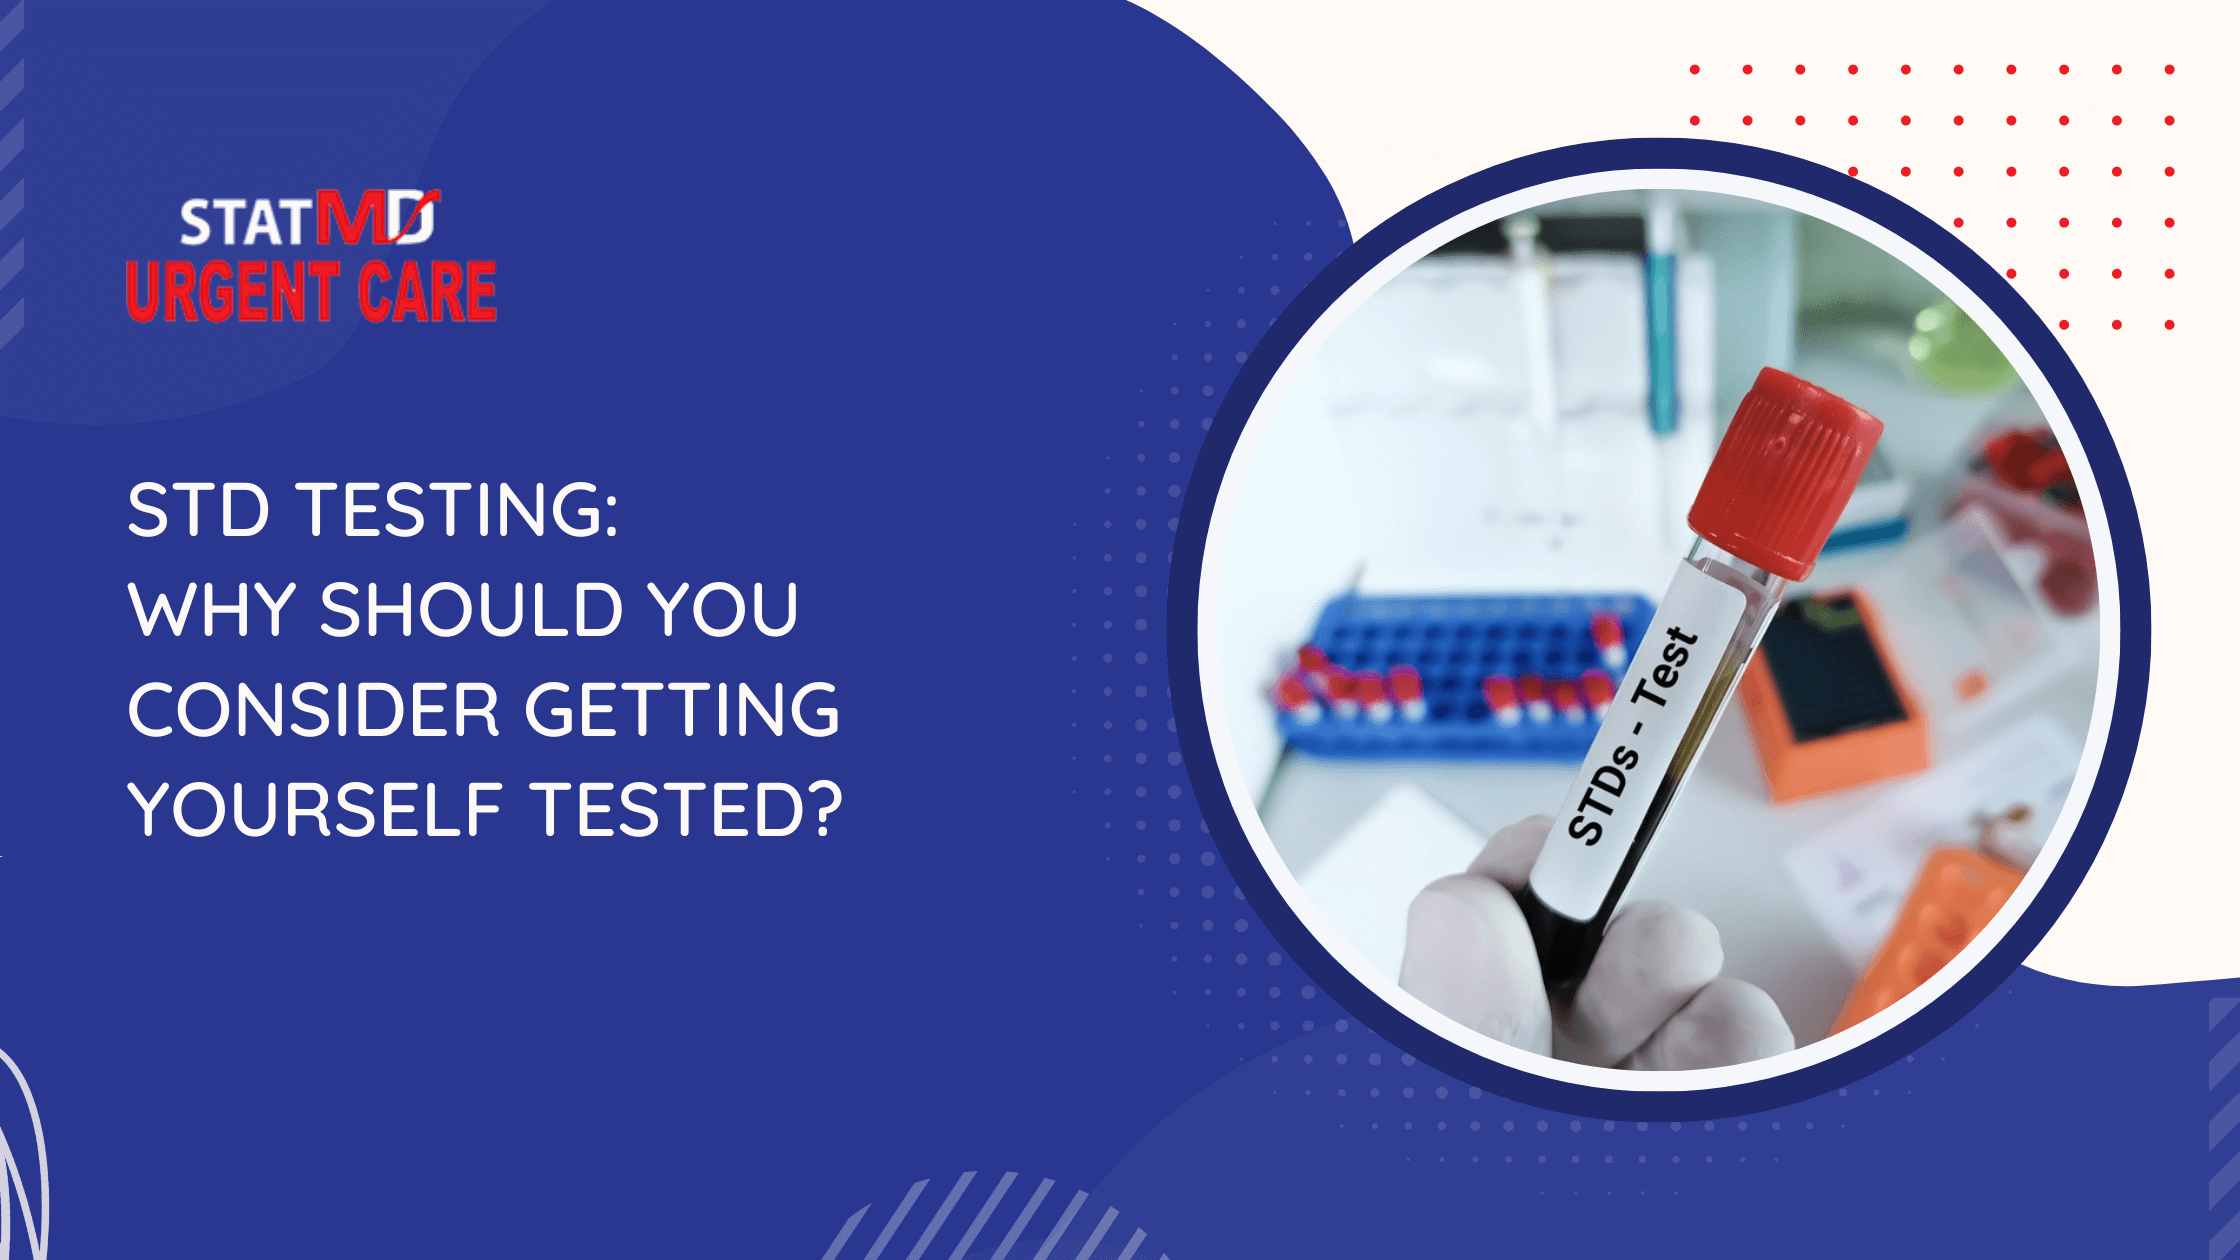 STD Testing: Why Should You Consider Getting Yourself Tested?